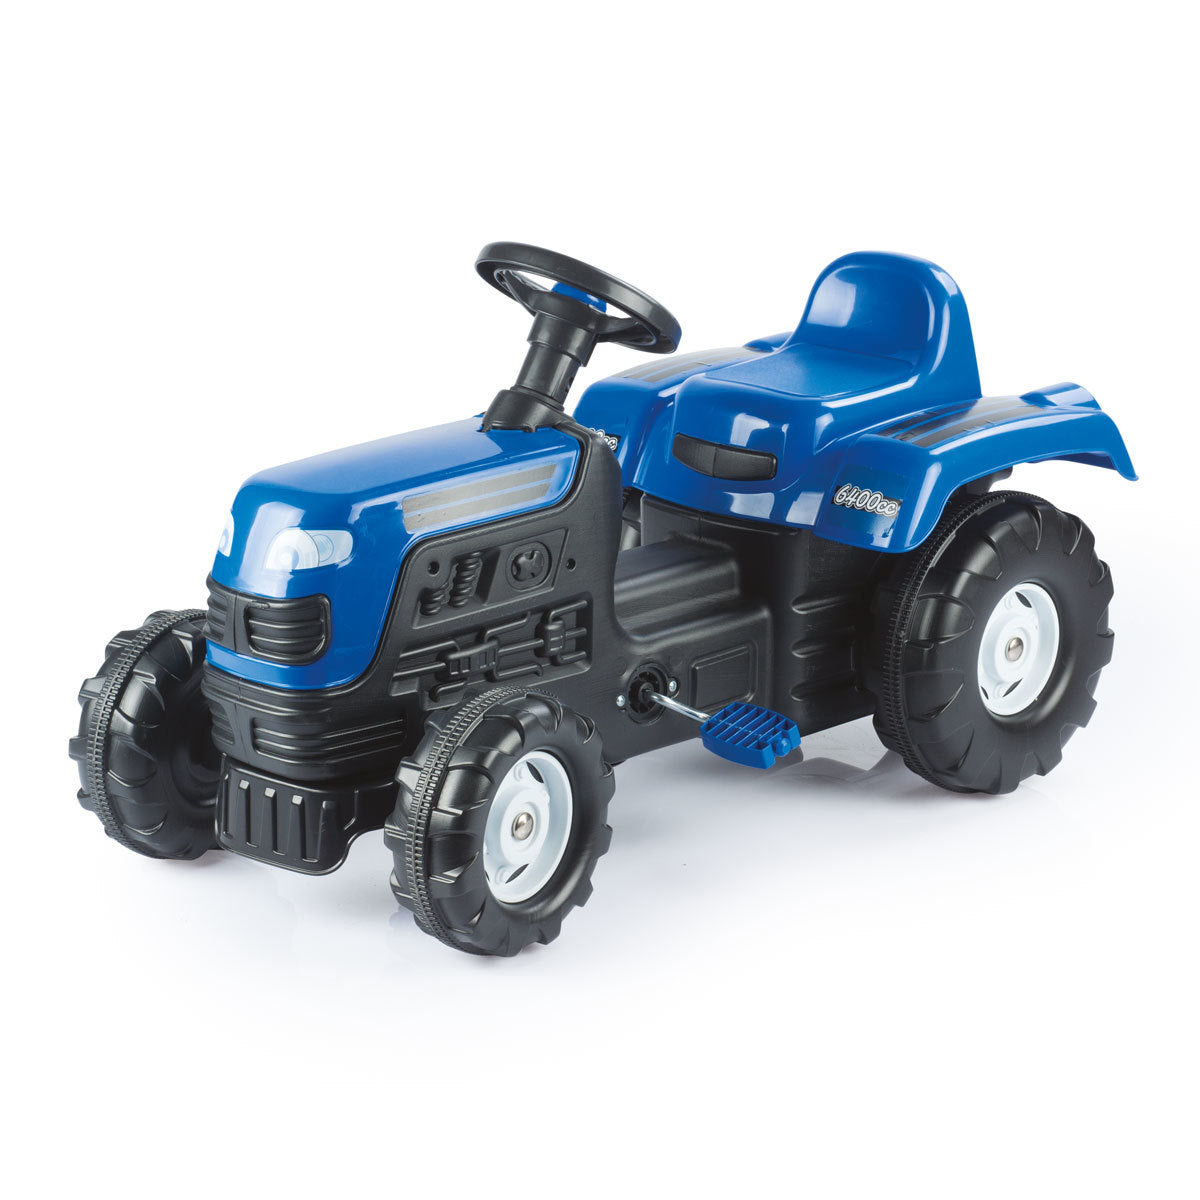 Sit n Ride Pedal Tractor